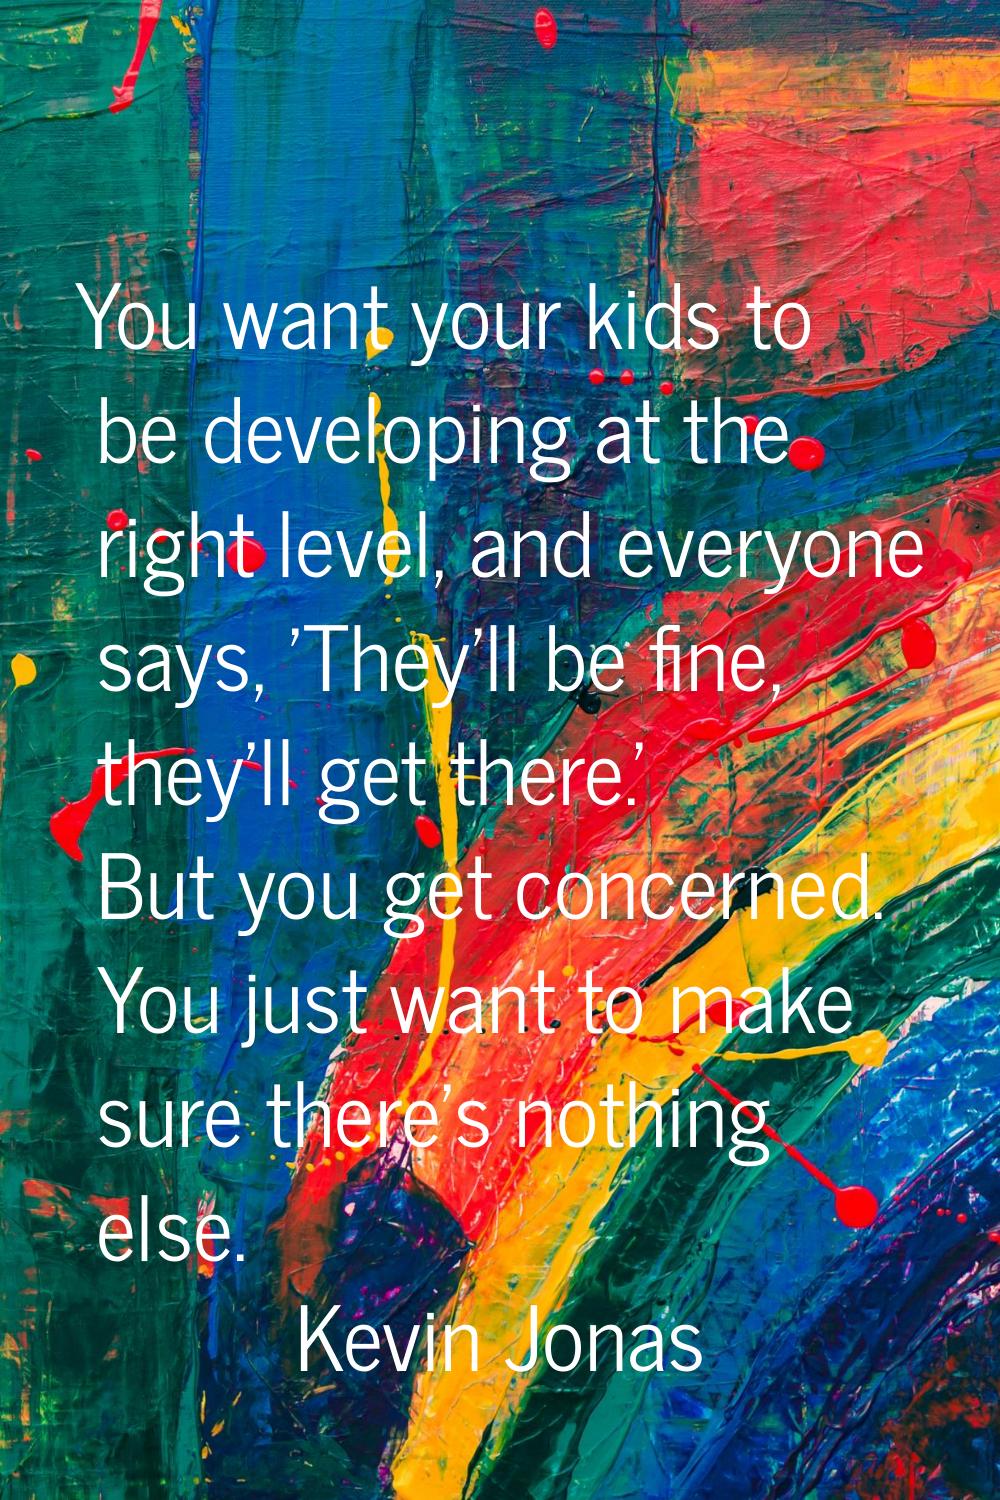 You want your kids to be developing at the right level, and everyone says, 'They'll be fine, they'l